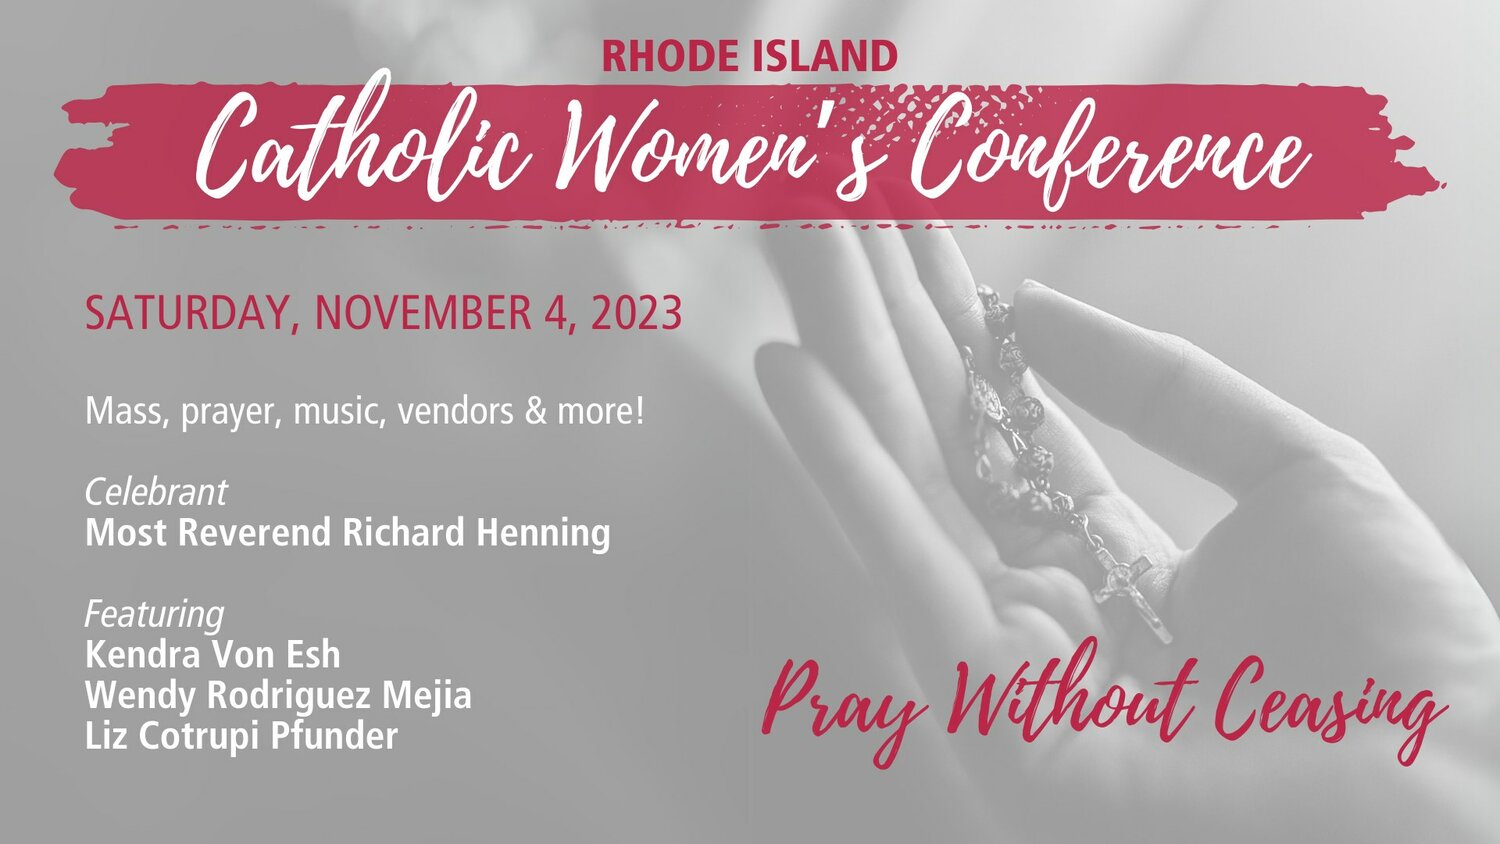 Women from throughout Rhode Island will gather at the Cathedral of Saints Peter and Paul on Saturday, Nov. 4, for the annual diocesan Catholic Women’s Conference.